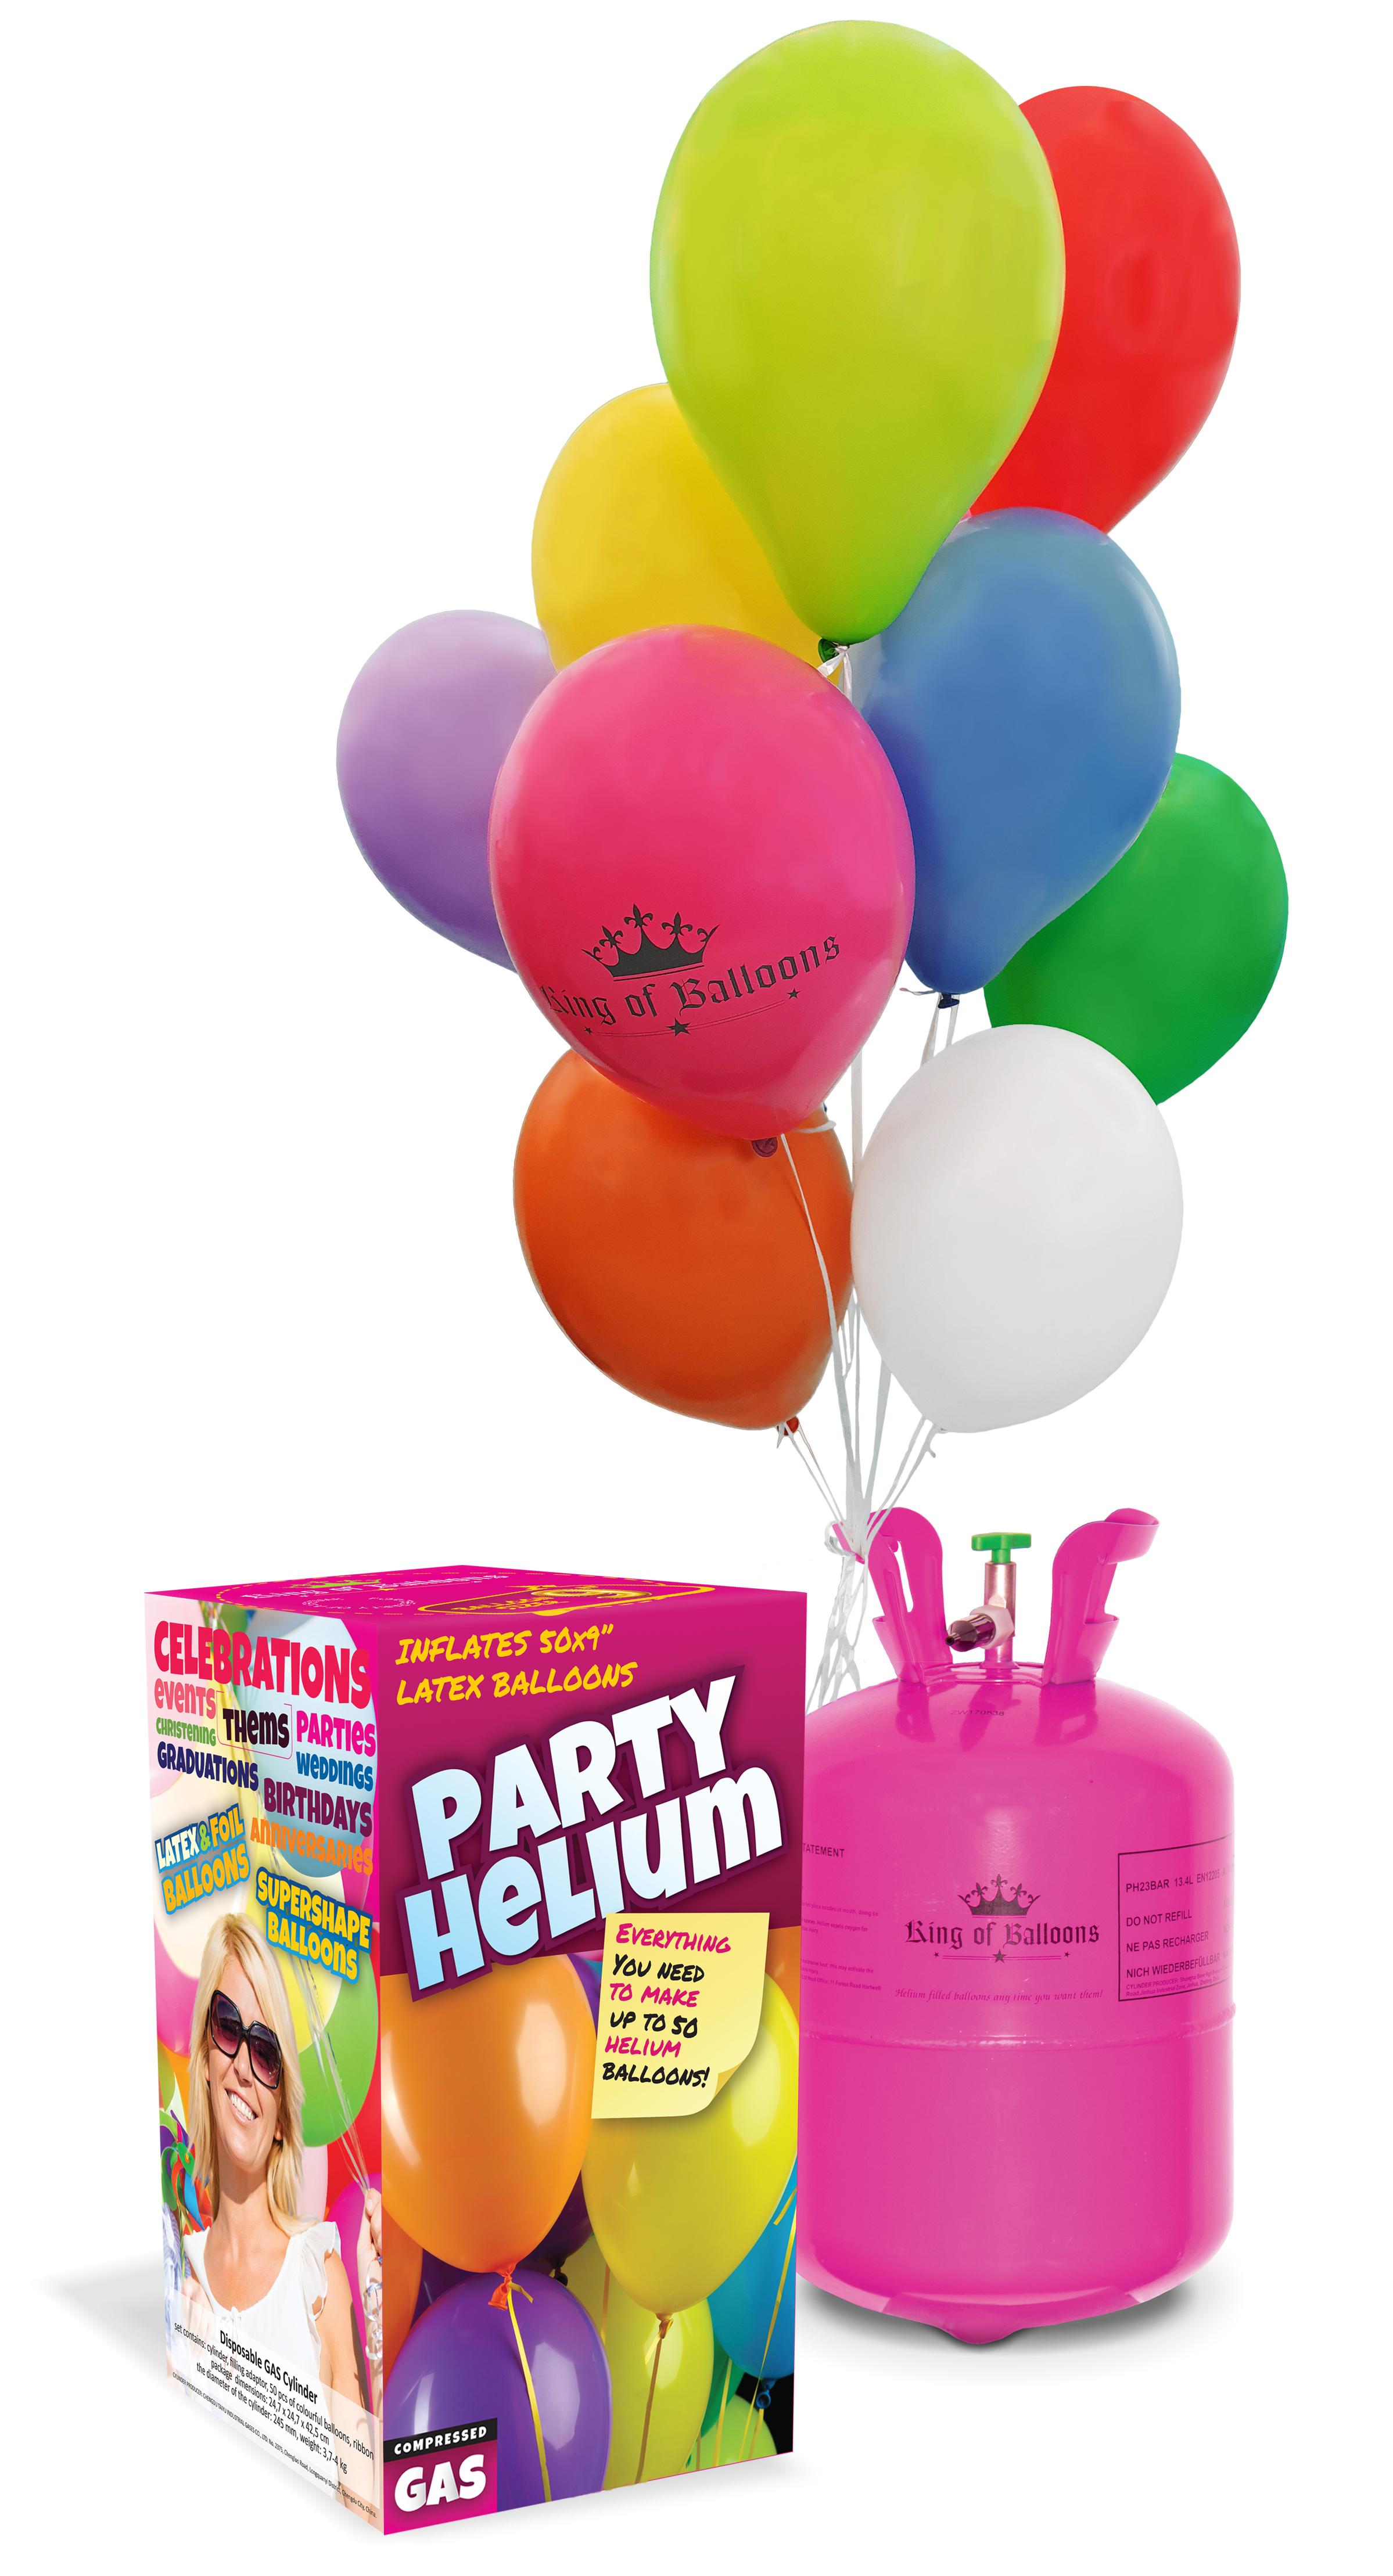 Helium cylinder for 50 balloons + balloons + ribbon